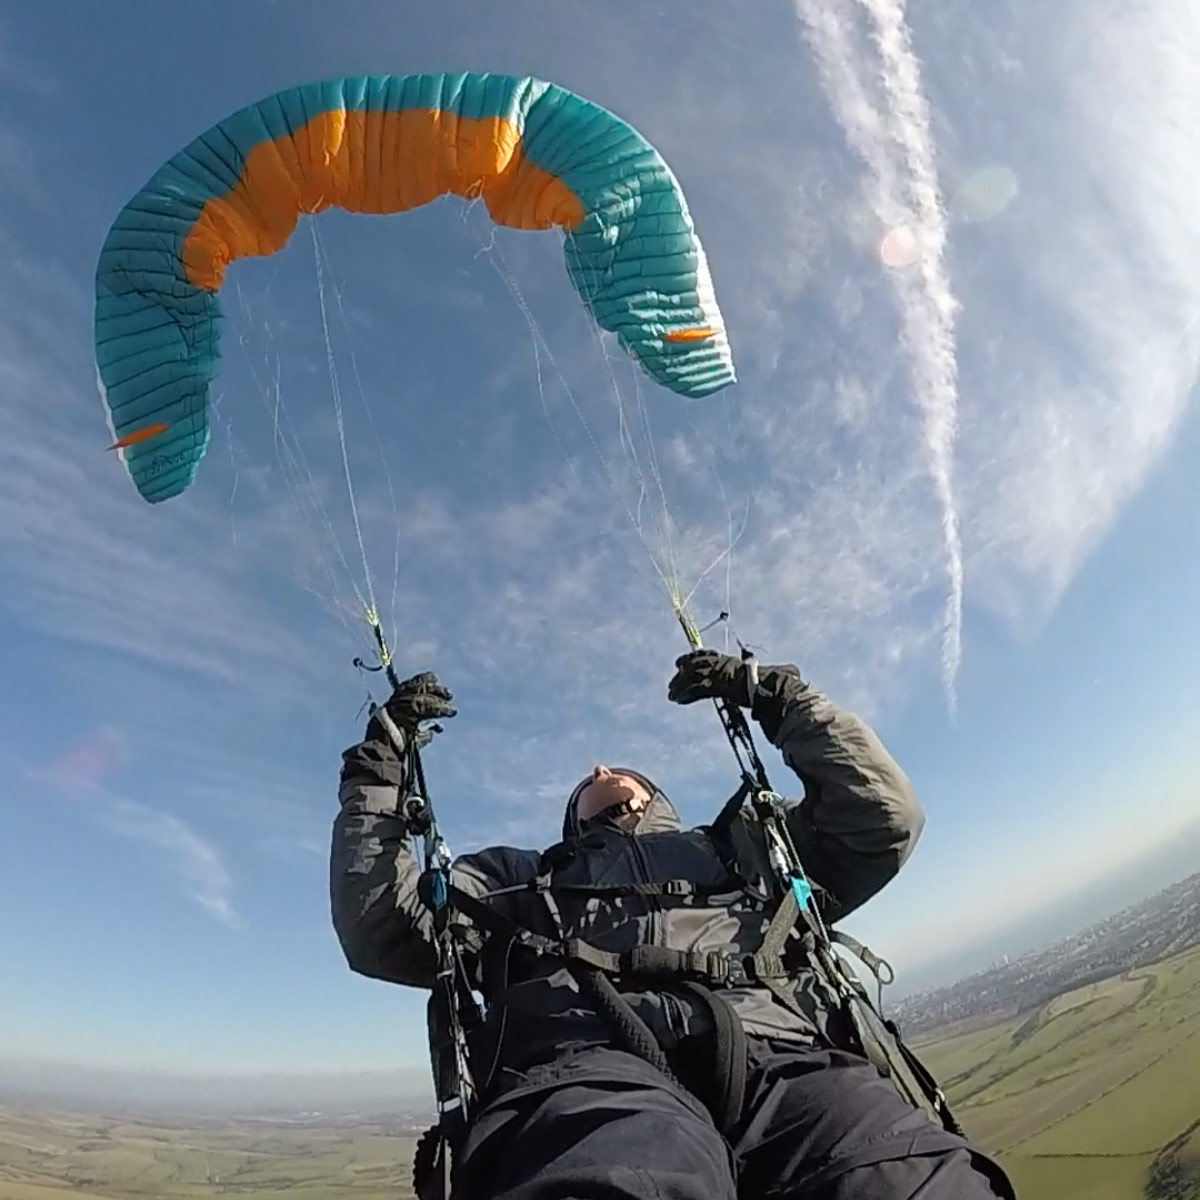 Full frontal collapse on a paraglider